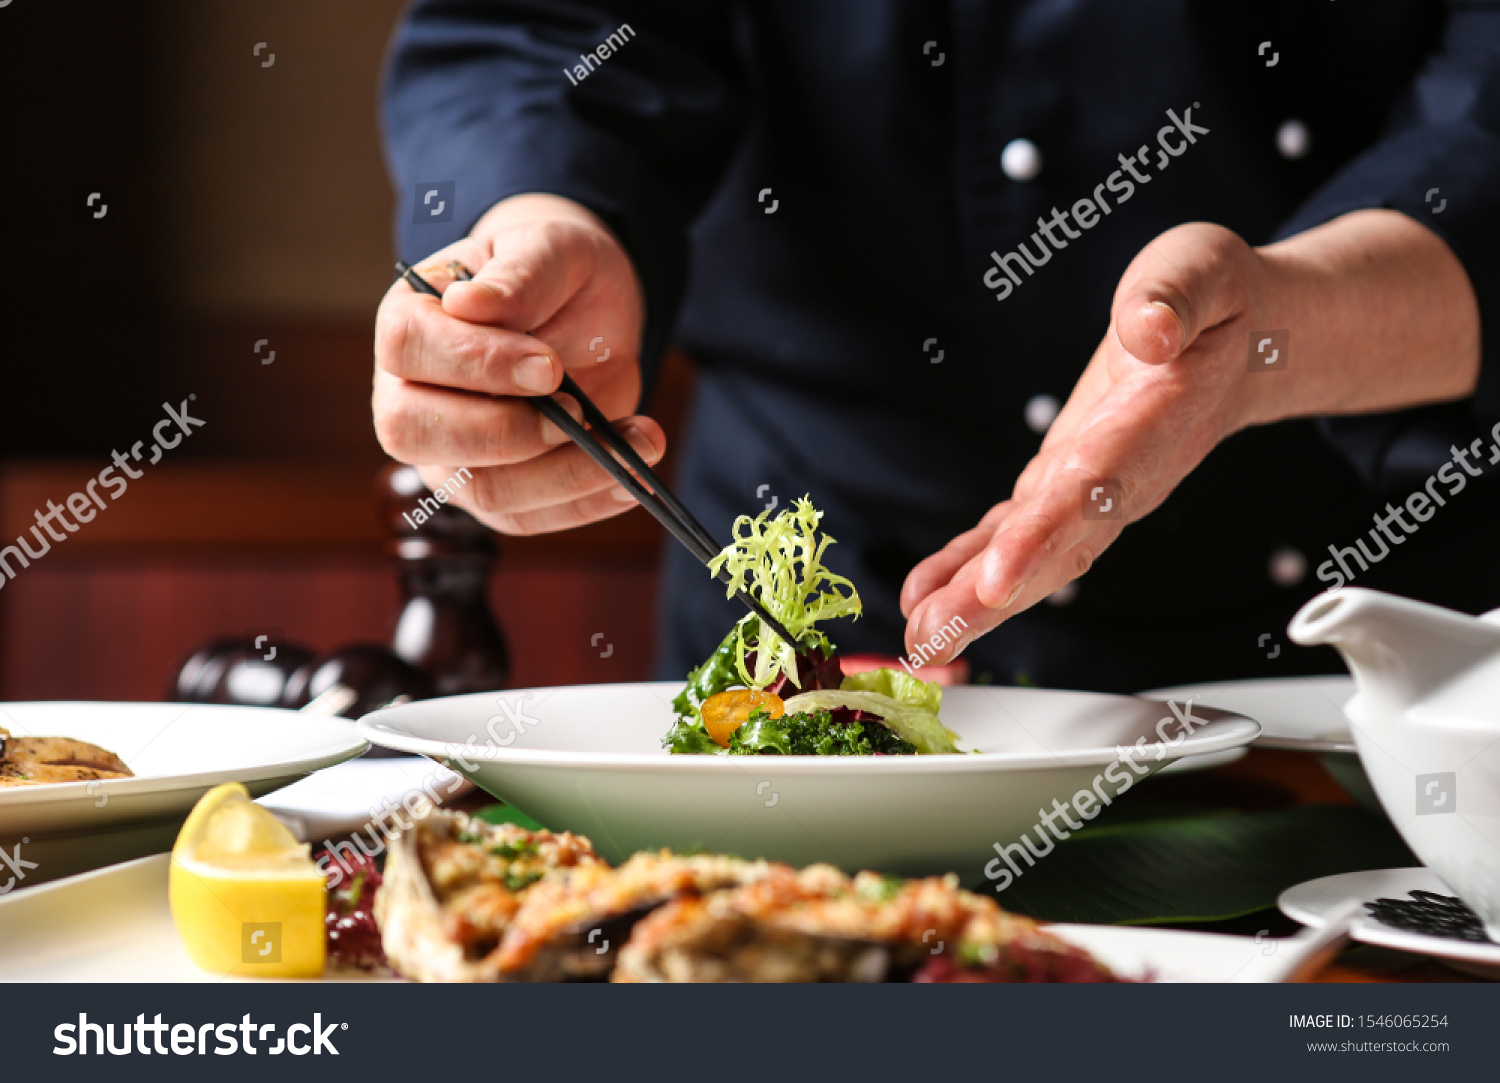 a hotel chef. He is decorating his food. #1546065254